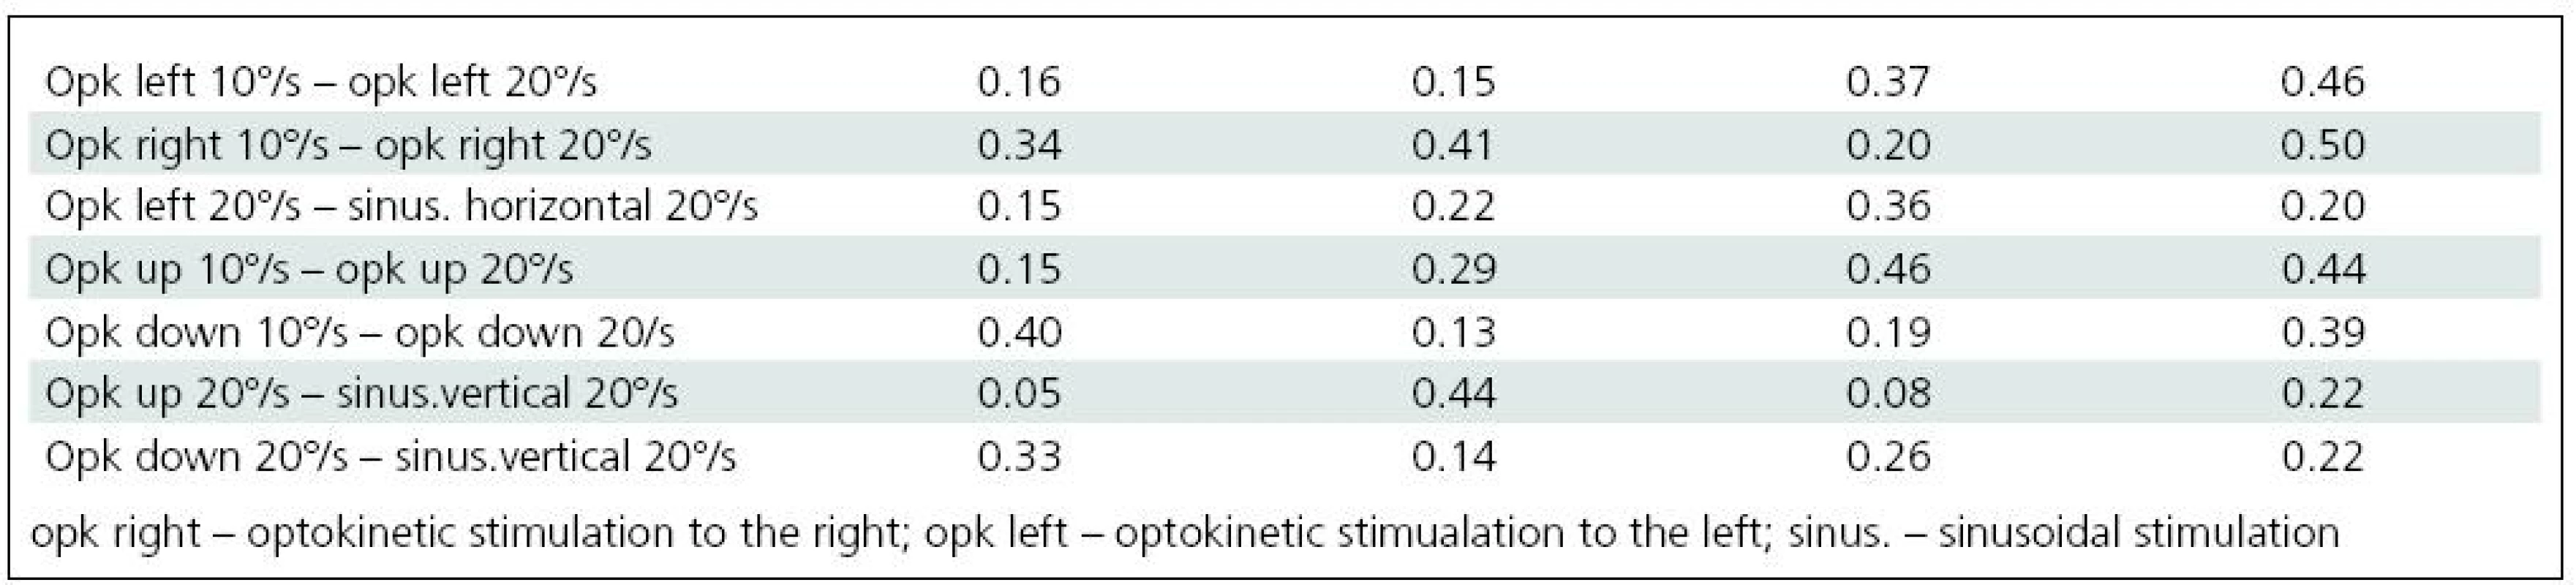 Comparison of craniocorpographical parameters during Romberg’s test when the intensity of visual stimulation is varied and when optokinetic and sinusoidal stimulation of the same velocity takes place (no significant differences).